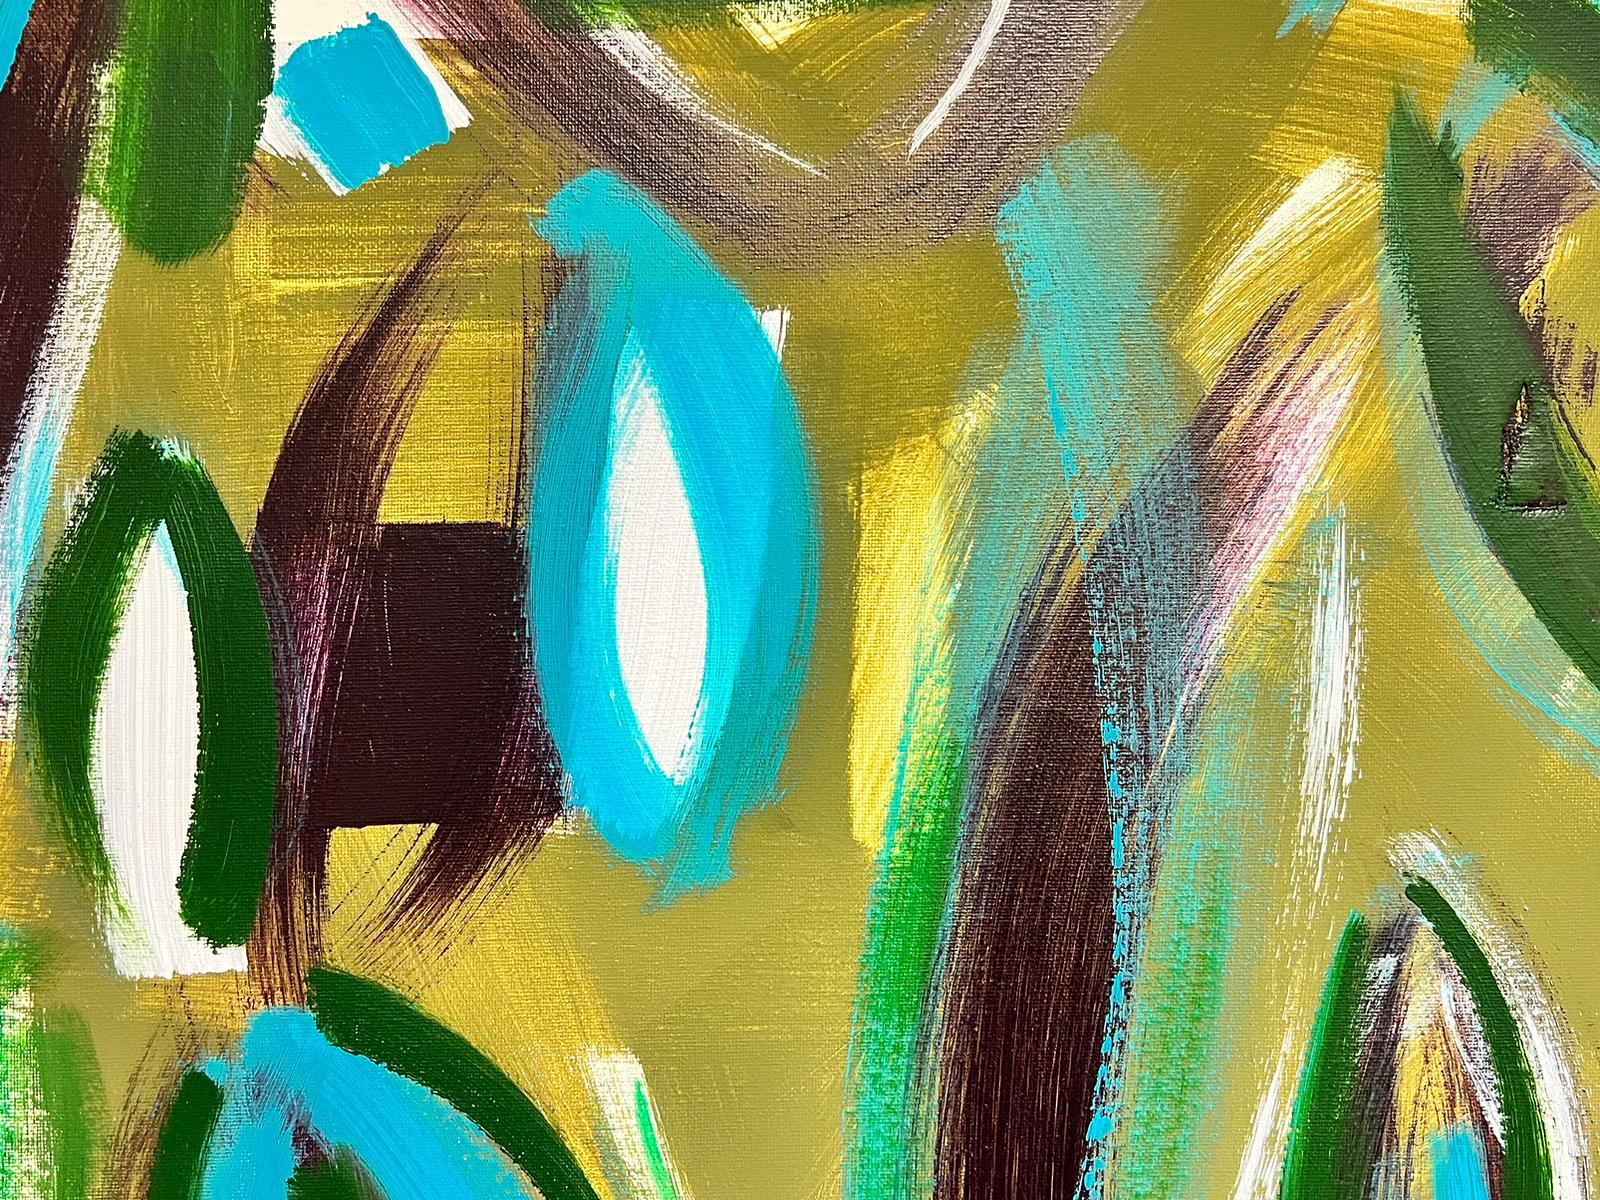 Superb original abstract painting by the contemporary British abstract artist Robert Somerton, born 1972. 

Bright, vivid brushwork all make up this highly unique and appealing abstract expressionist painting. 

The painting is in excellent